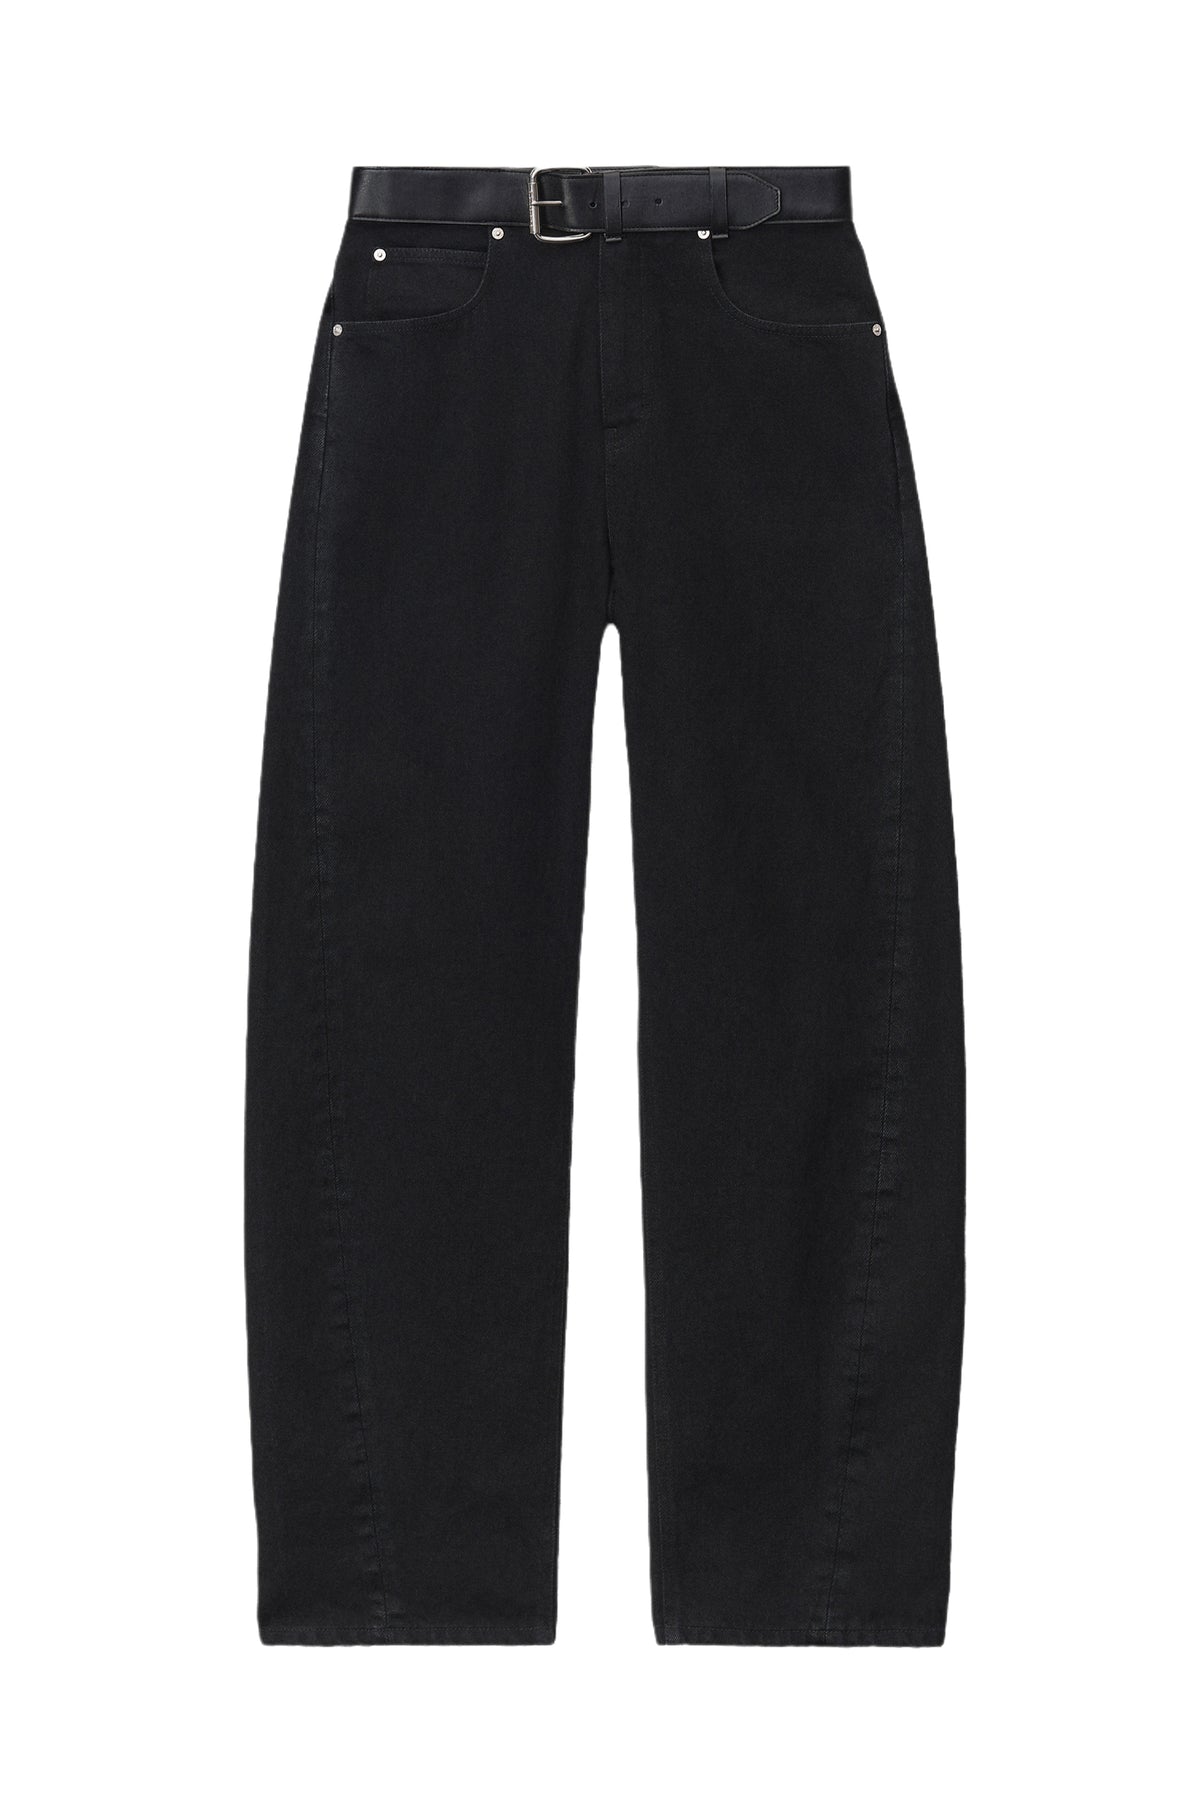 LEATHER BELTED BALLOON JEAN / WASHED BLACK